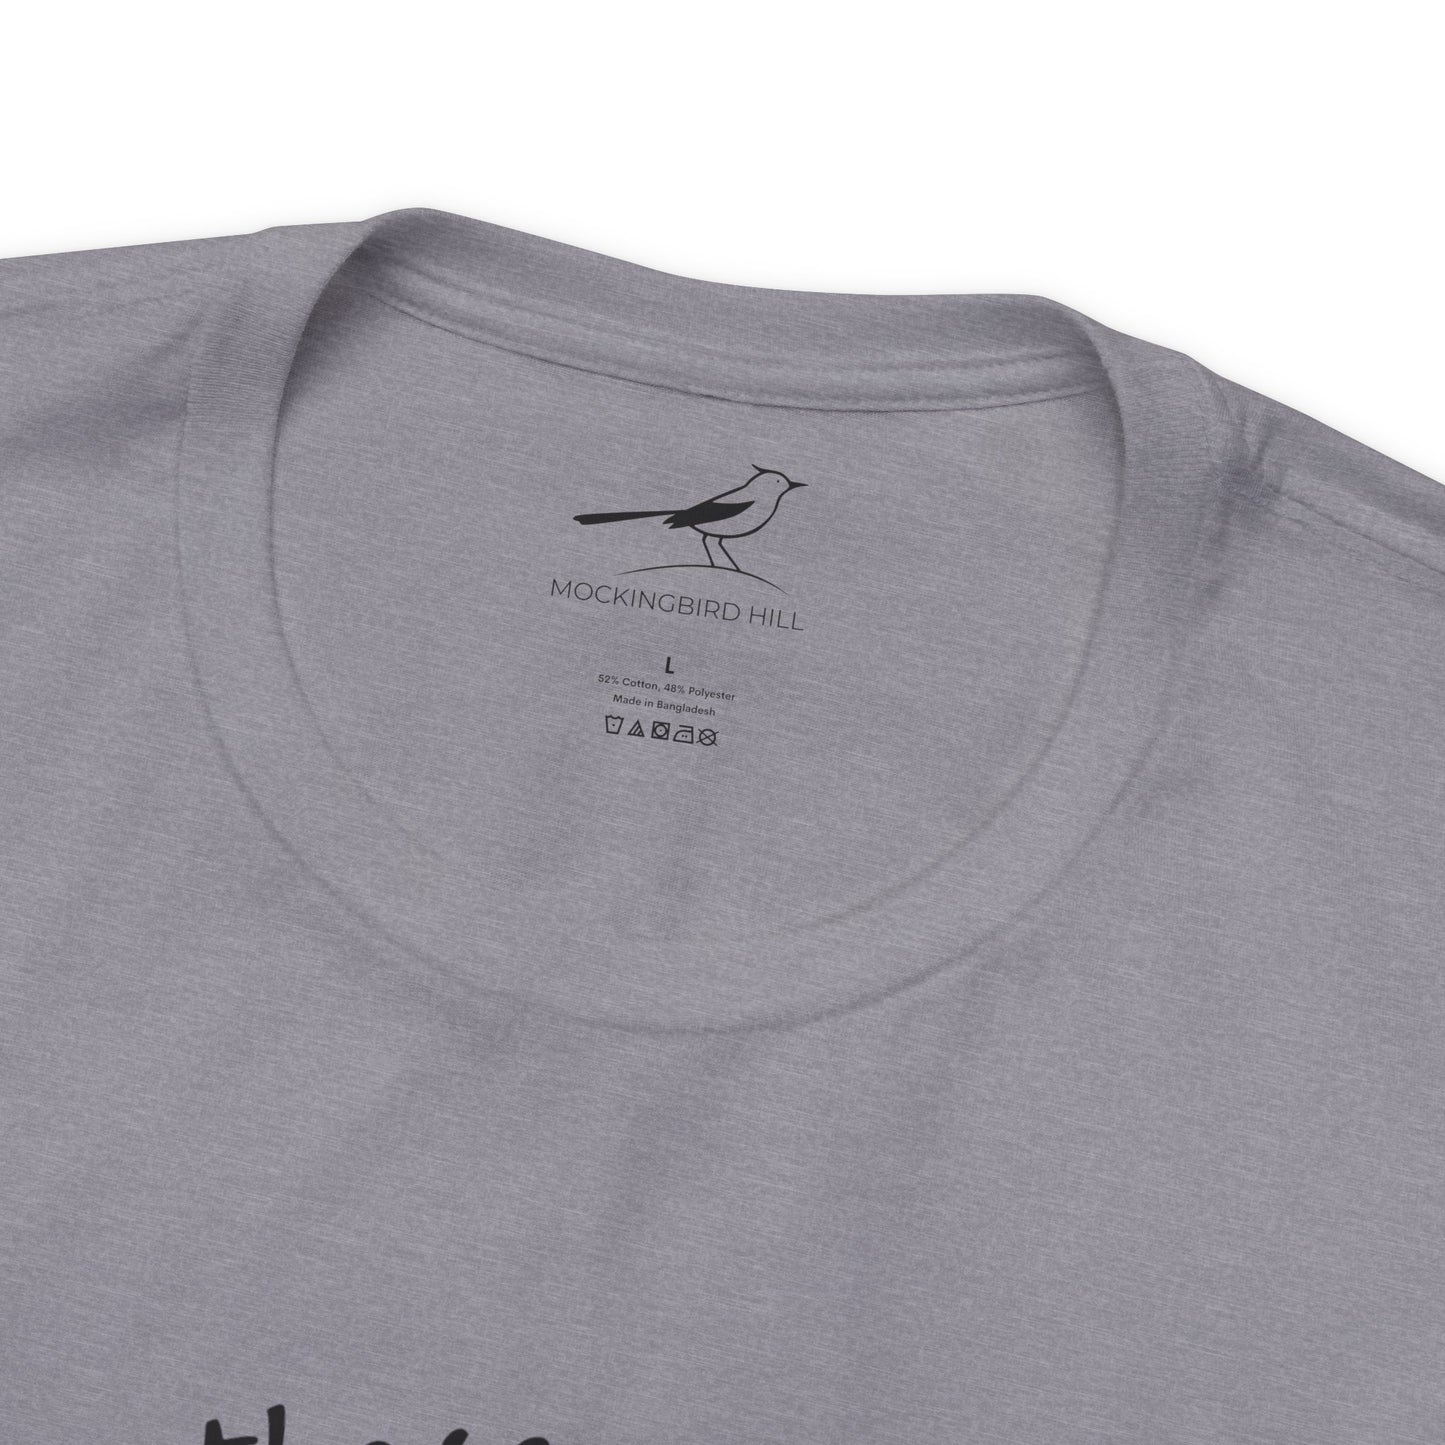 "Not all those who wander..." Tolkien Quote Short Sleeve Tee